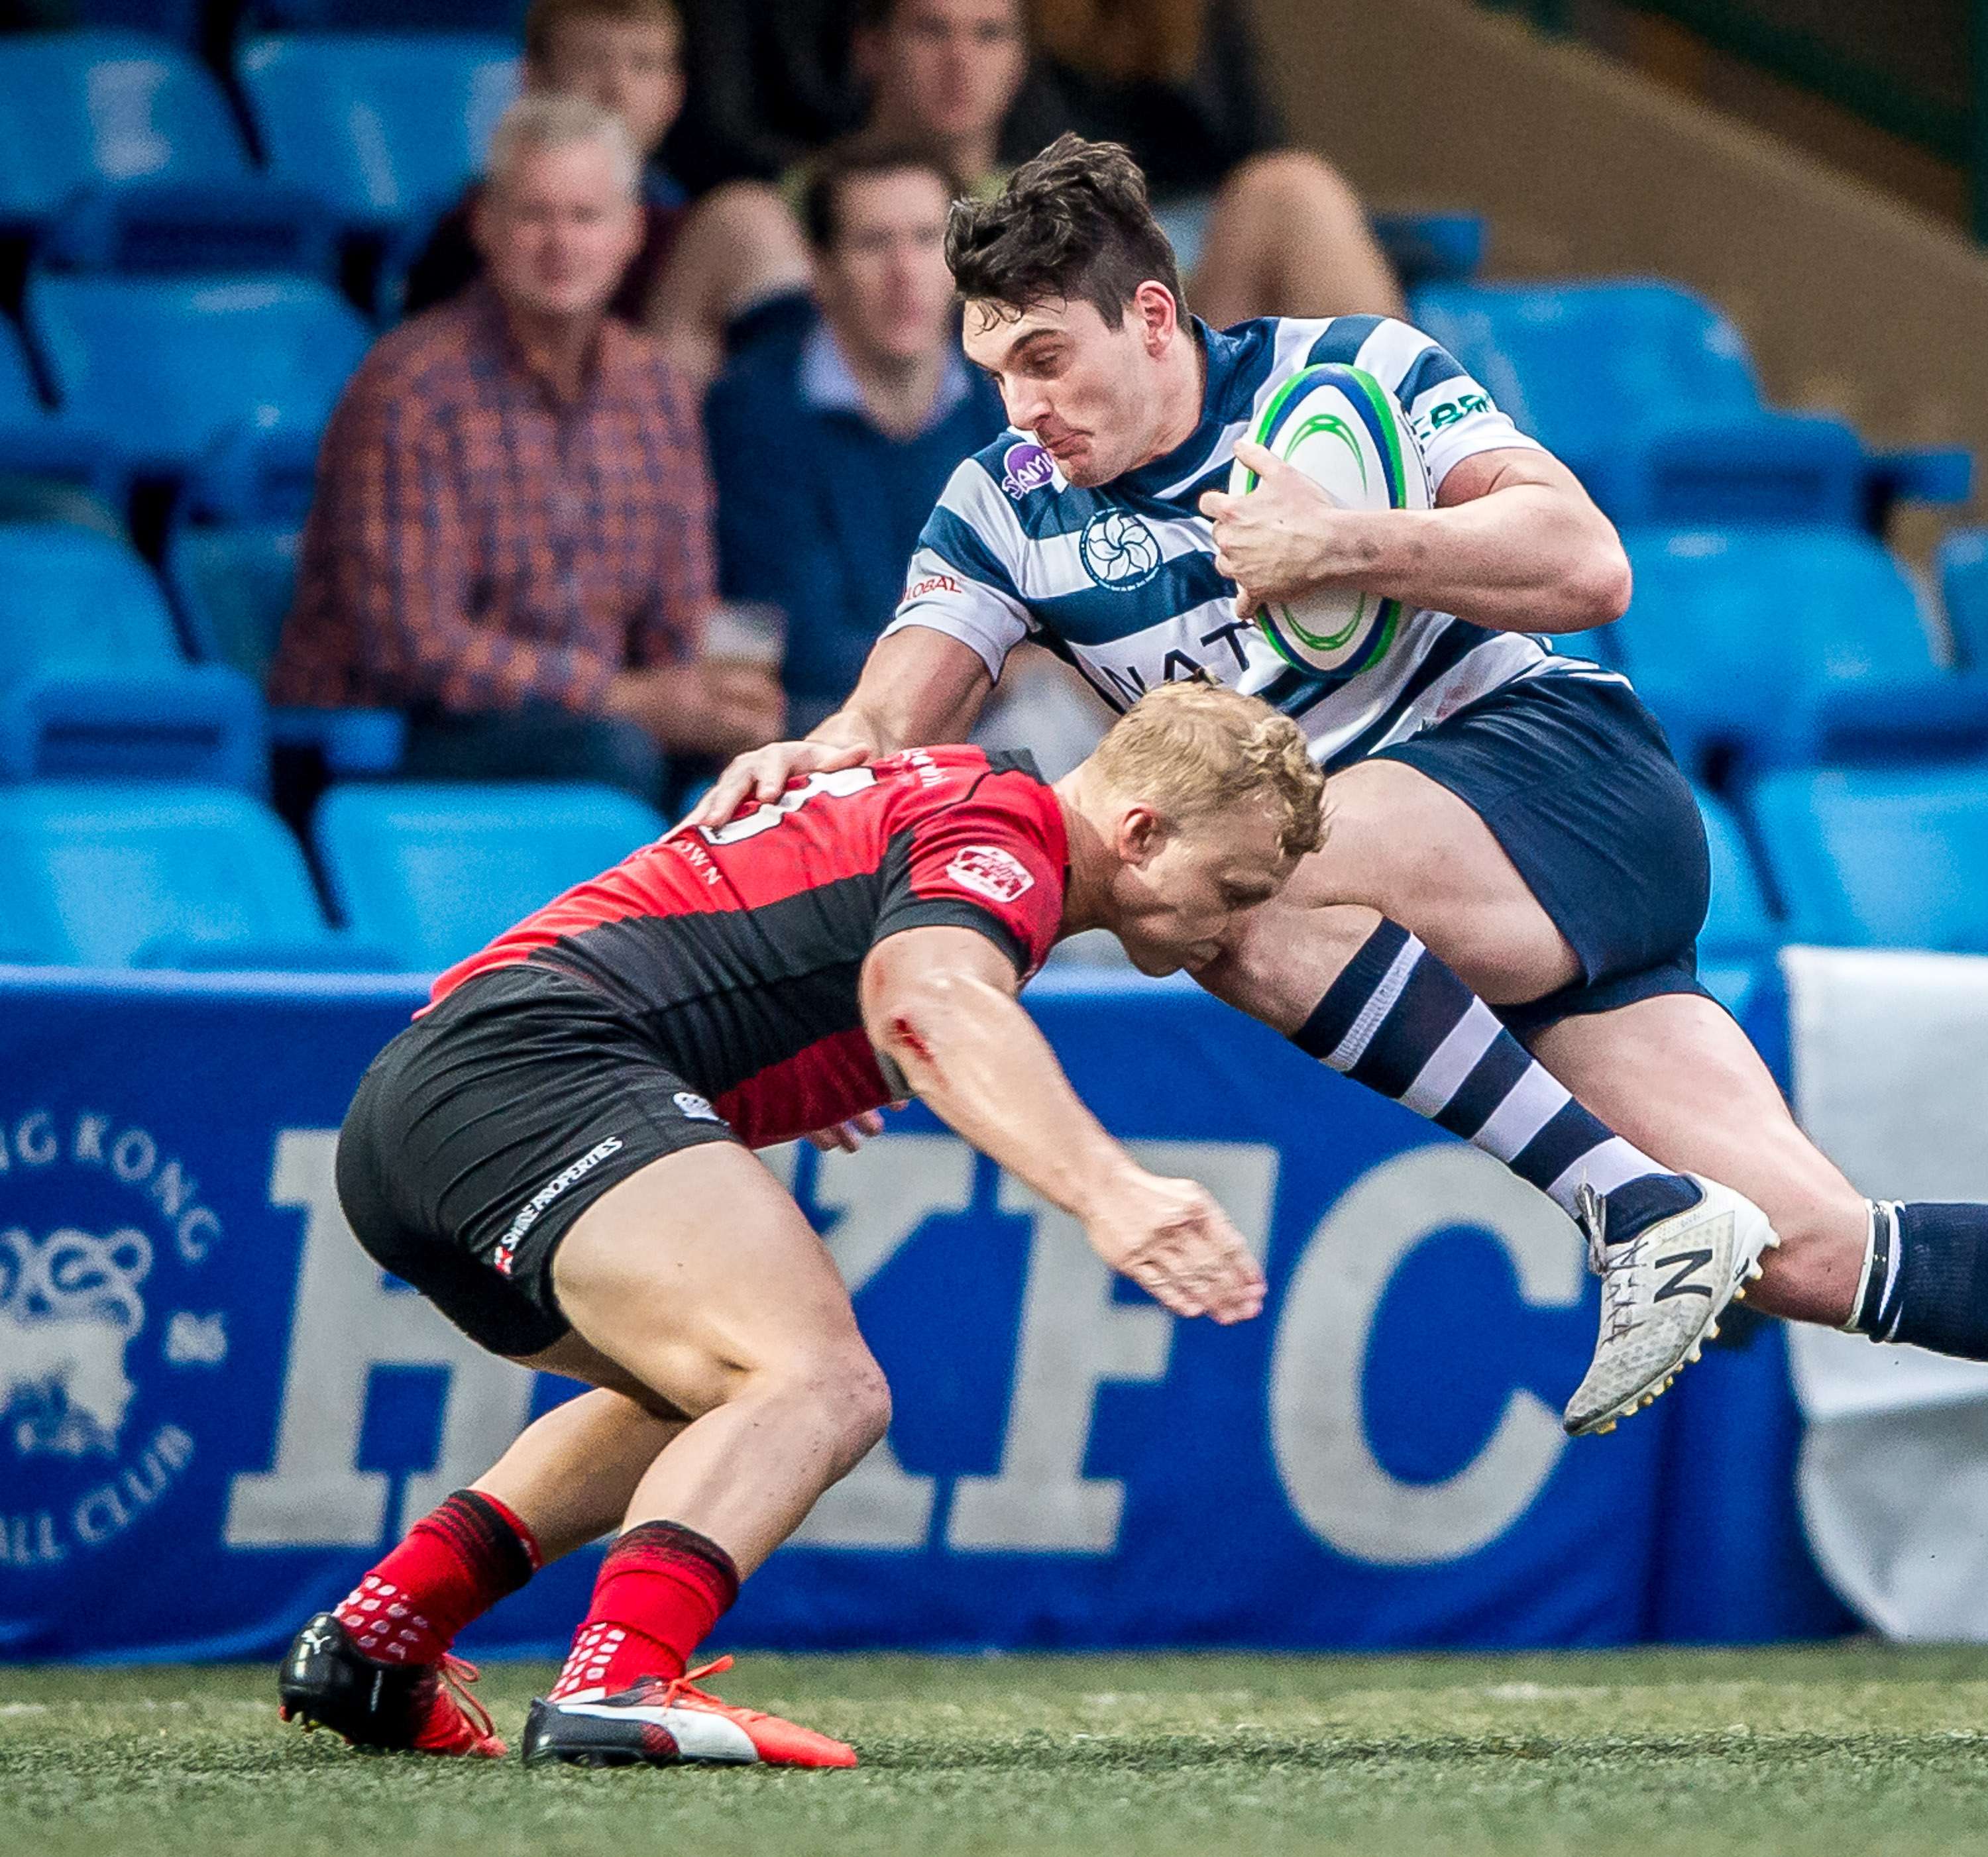 HKFC’s Charlie Higson-Smith is tackled by Max Woodward in the Hong Kong Premiership on Saturday. Photo: HKRU